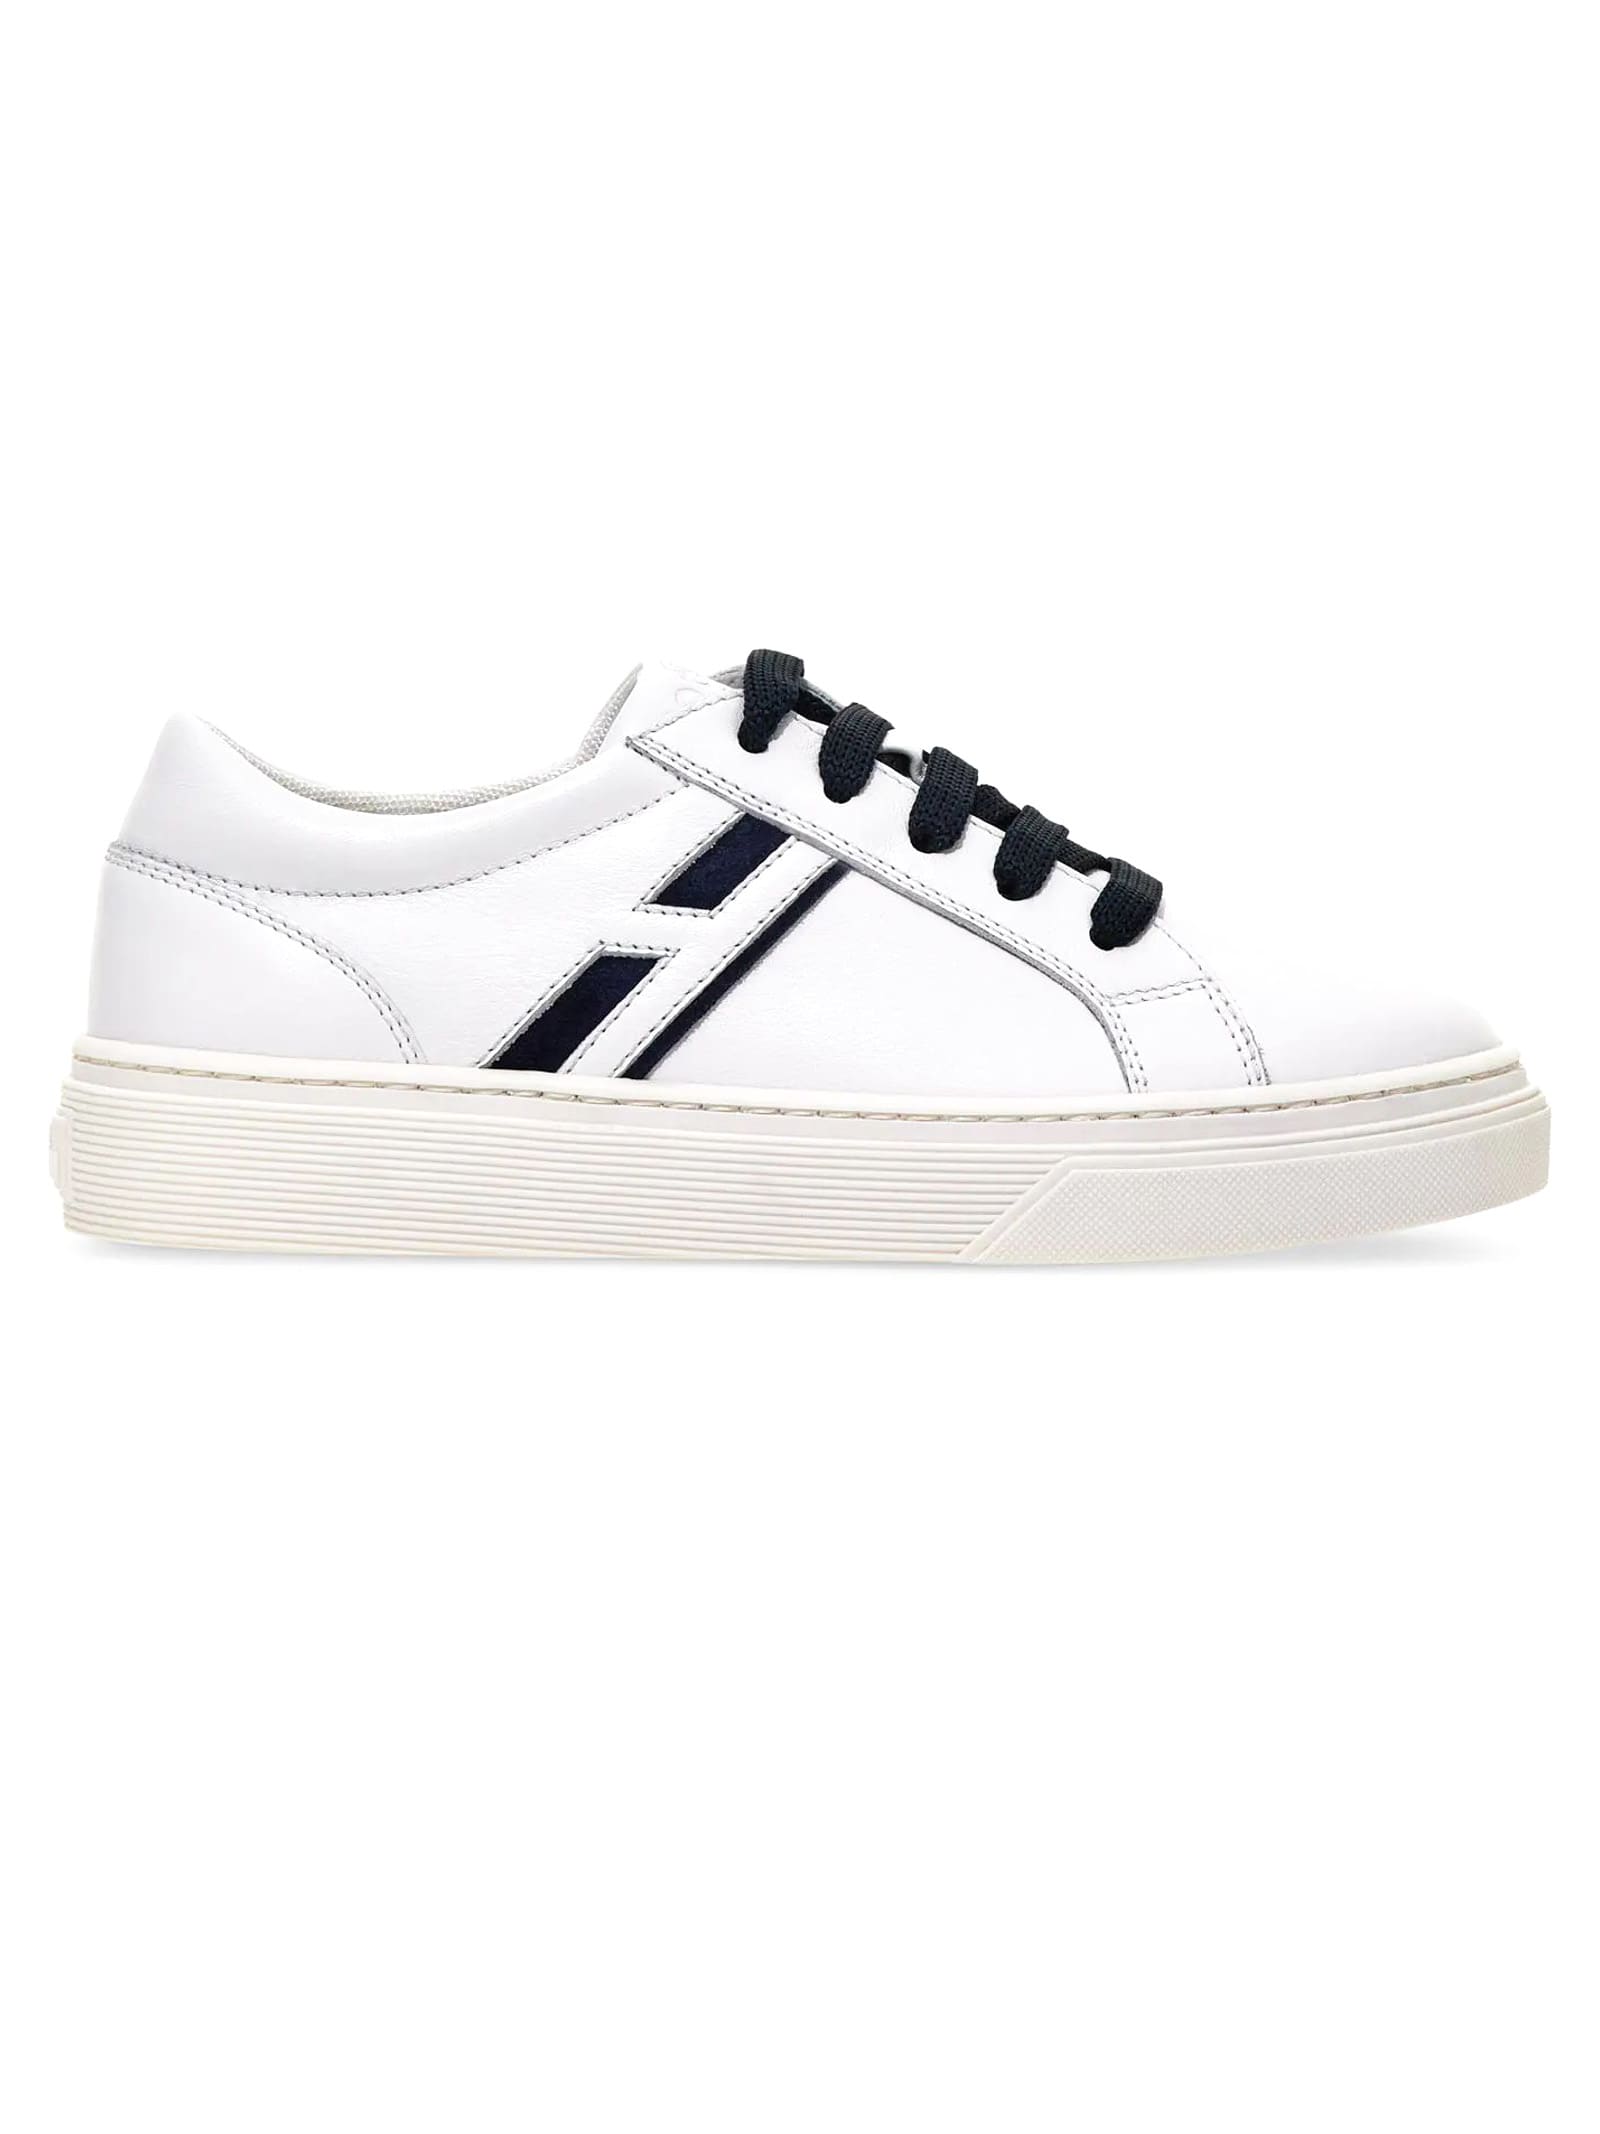 HOGAN SNEAKERS H365 IN WHITE LEATHER